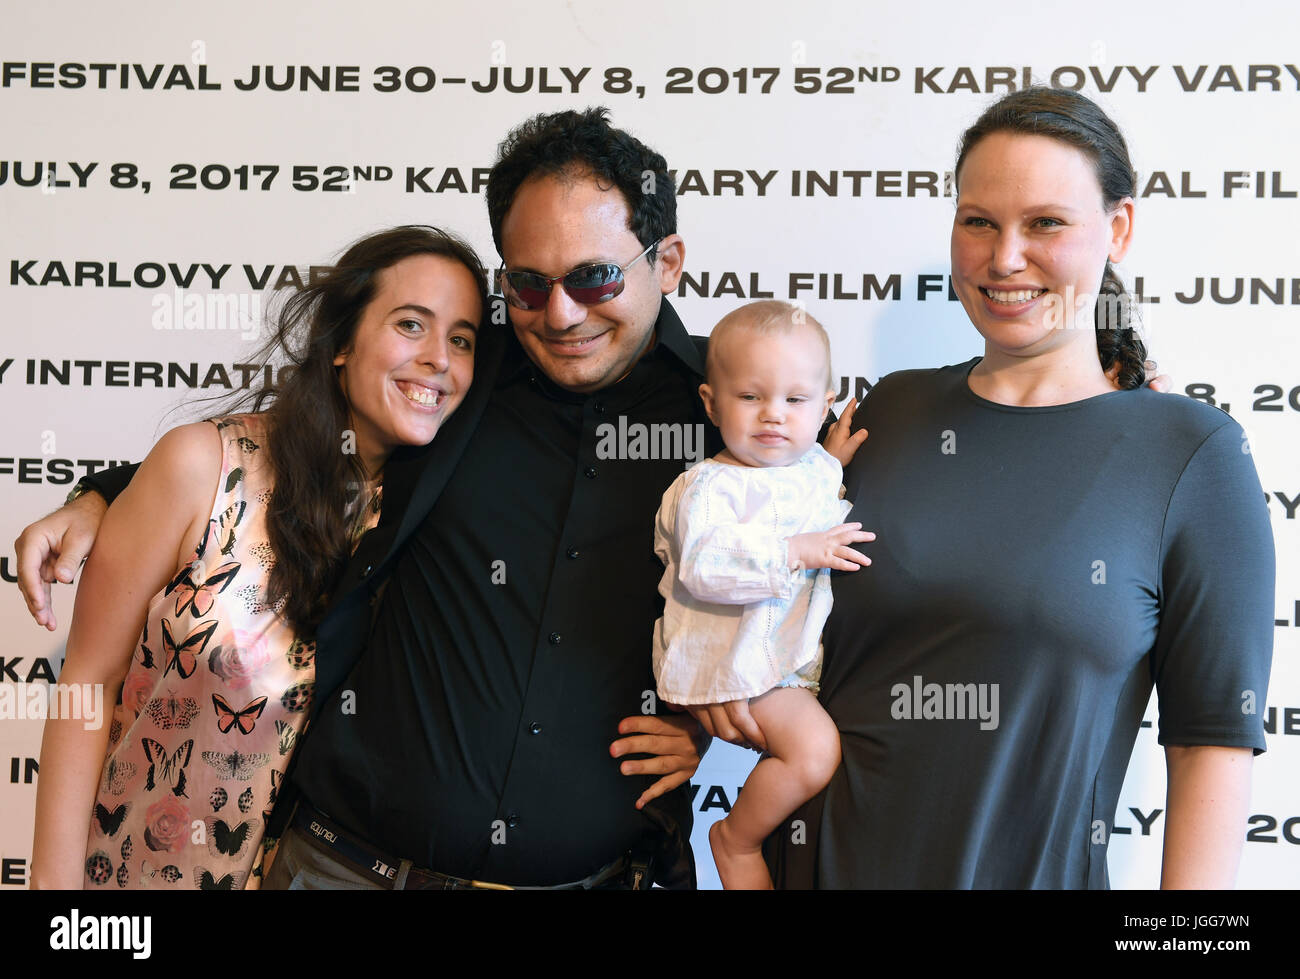 Karlovy Vary, Czech Republic. 06th July, 2017. Actress Samantha Elisofon (left), actor Brandon Polansky (center) and director Rachel Israel introduce the American film Keep the Change during the 52nd International Film Festival in Karlovy Vary, Czech Republic, on July 6, 2017. Credit: Katerina Sulova/CTK Photo/Alamy Live News Stock Photo